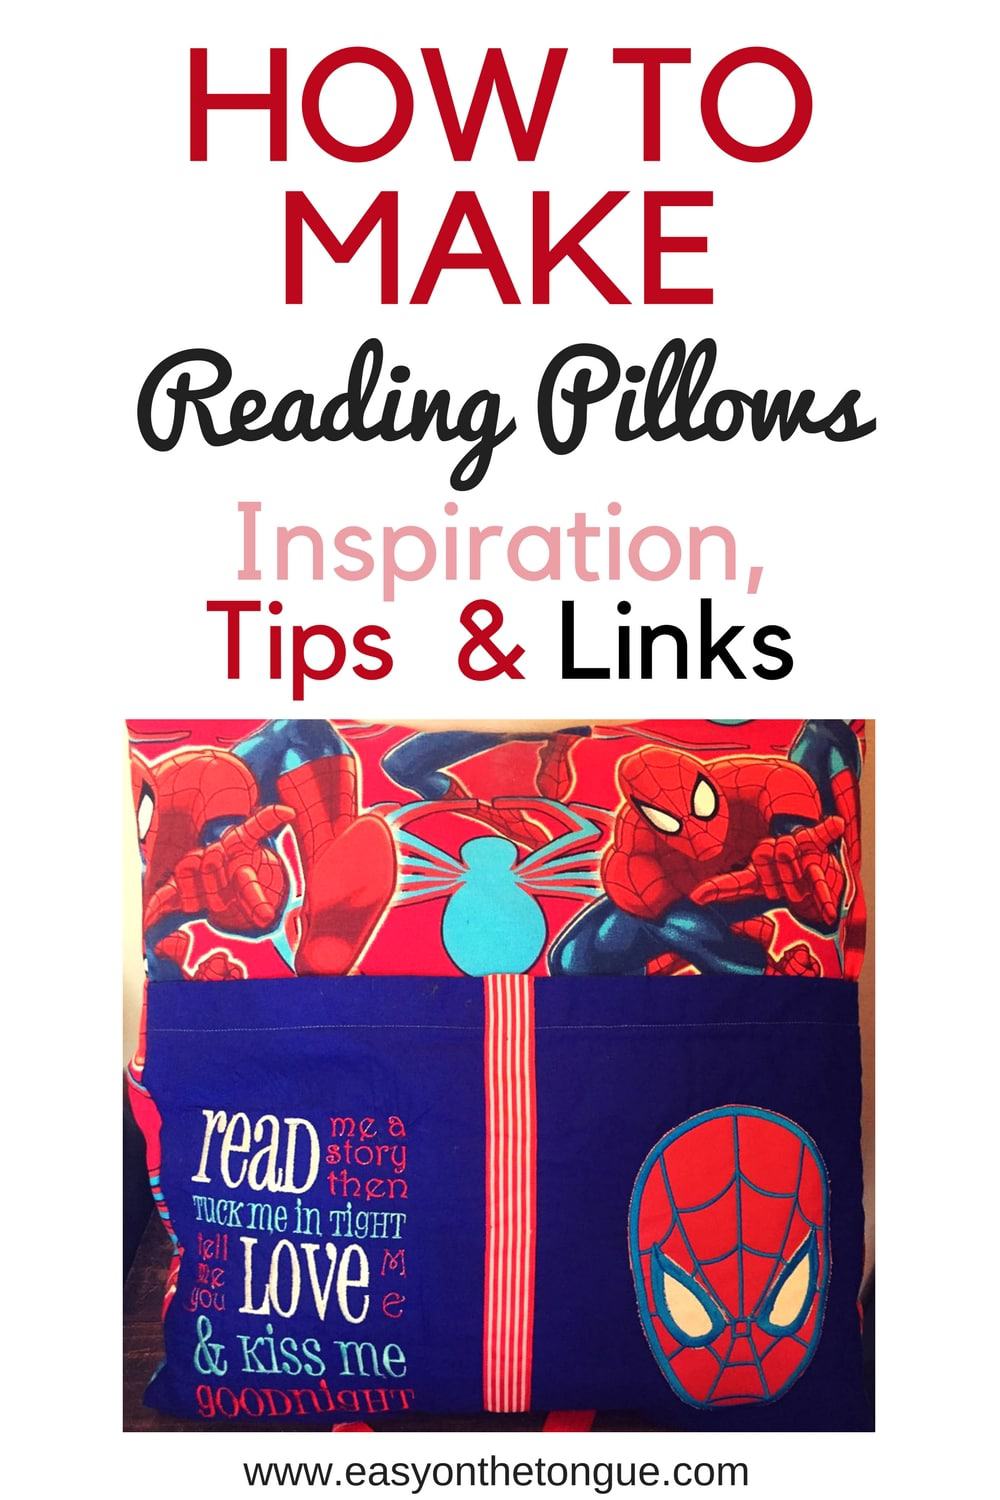 How to make Reading Pillows Inspiration Tips Links more at www.easyonthetongue.com  How to make Reading Pillows?  Inspiration, Tips and Links